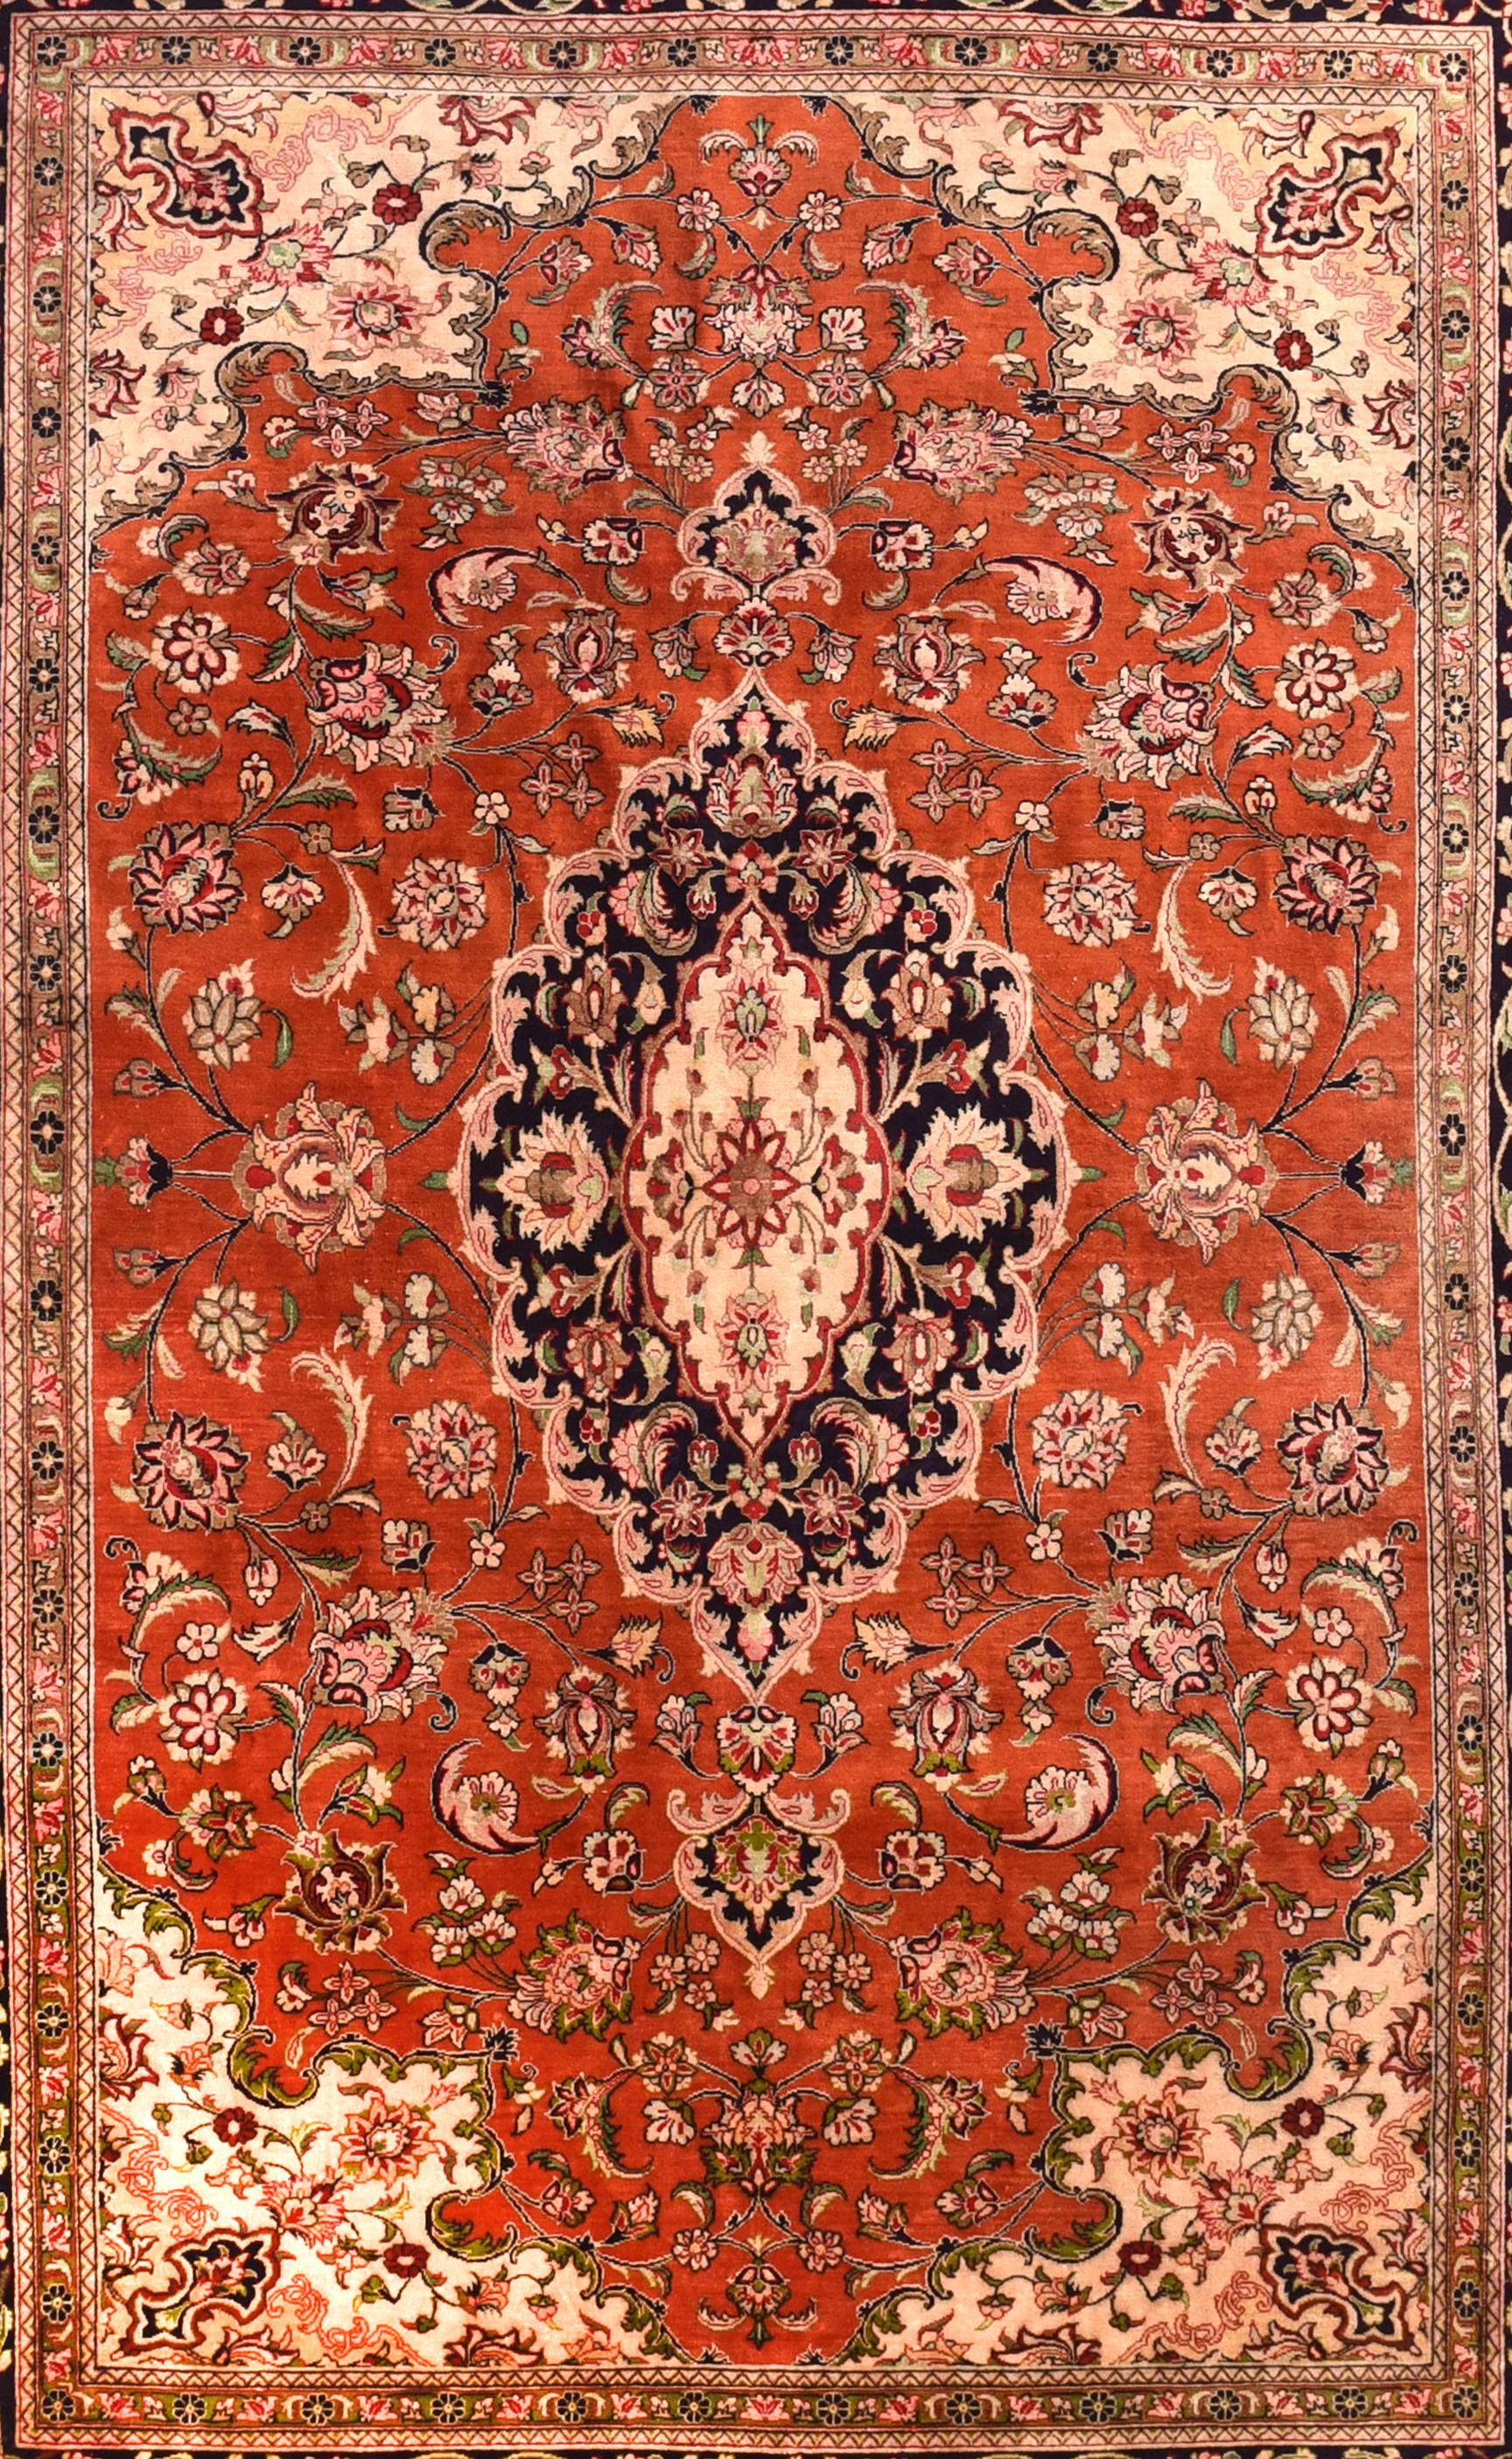 Qom rugs (or Qum, Ghom, Ghum) are made in the Qom Province of Iran, around 100 km south of Tehran. Although rug weaving in Qom was not a major industry until the past 100 years, the luxurious silk and wool rugs of Qom are known for their high